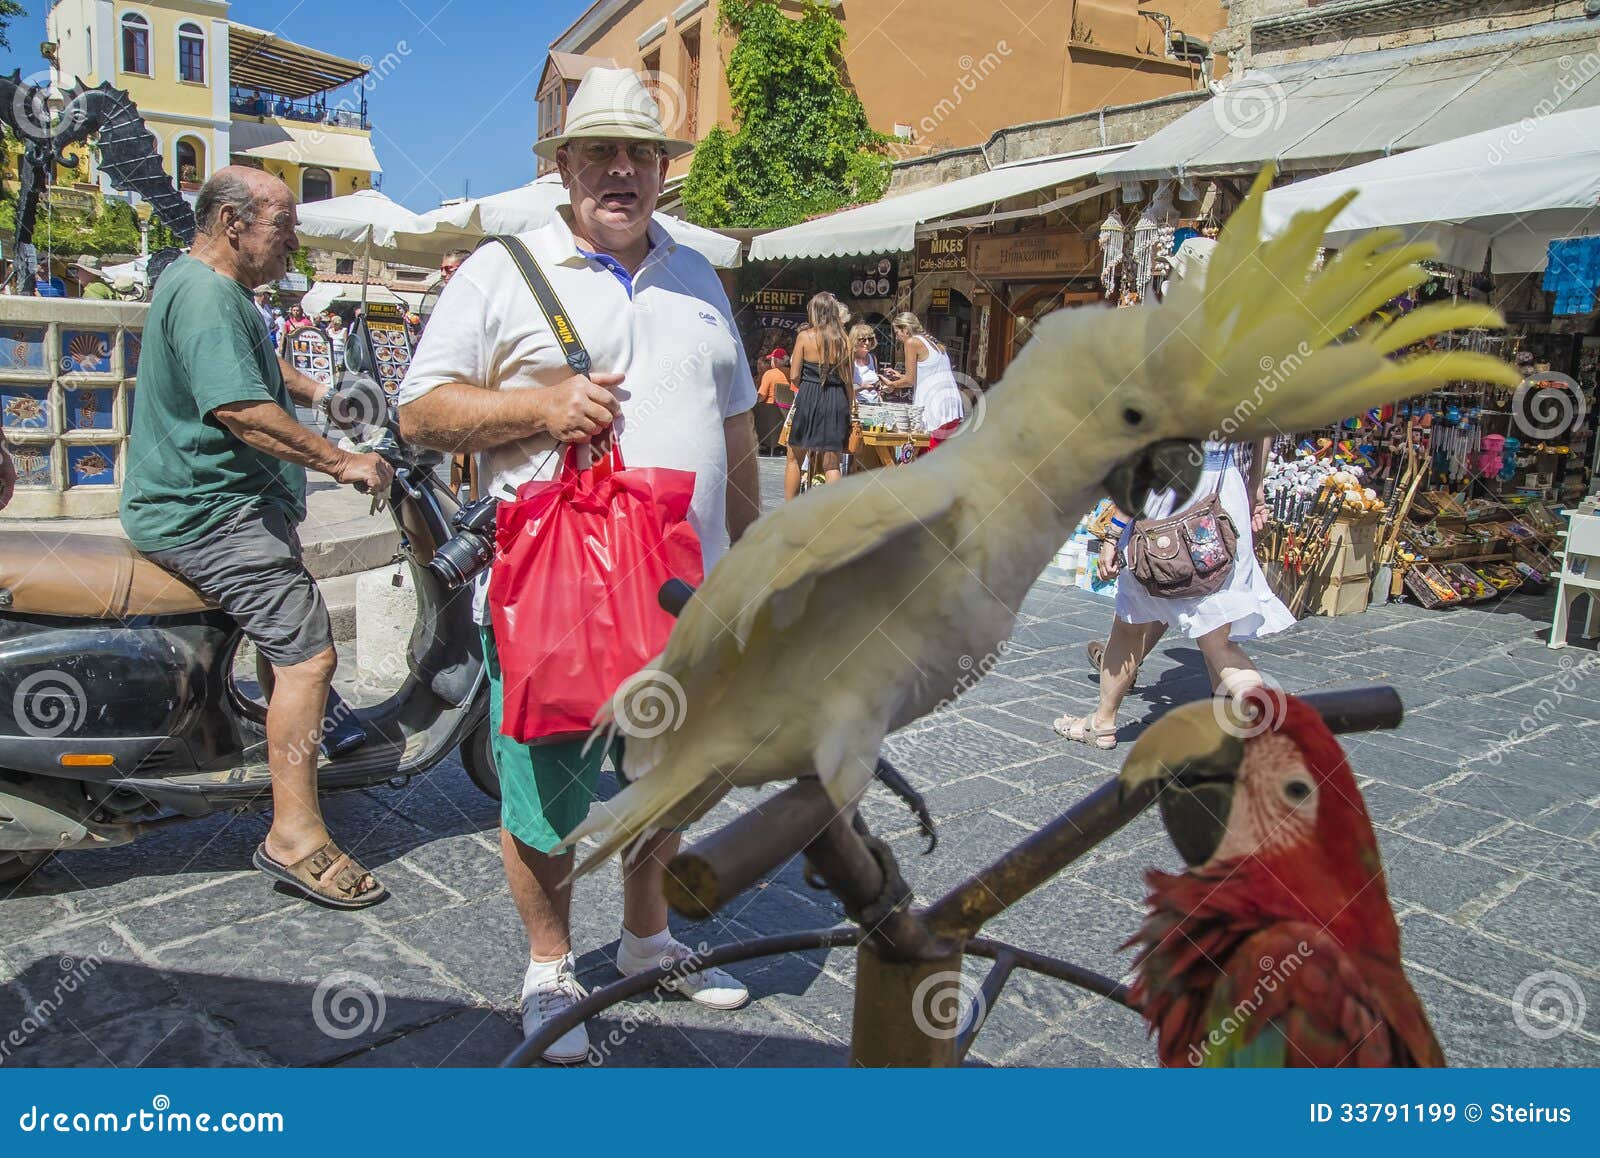 Cockatoo and Parrot in the Old of Rhodes Editorial Stock Image - Image of aramacao, 33791199